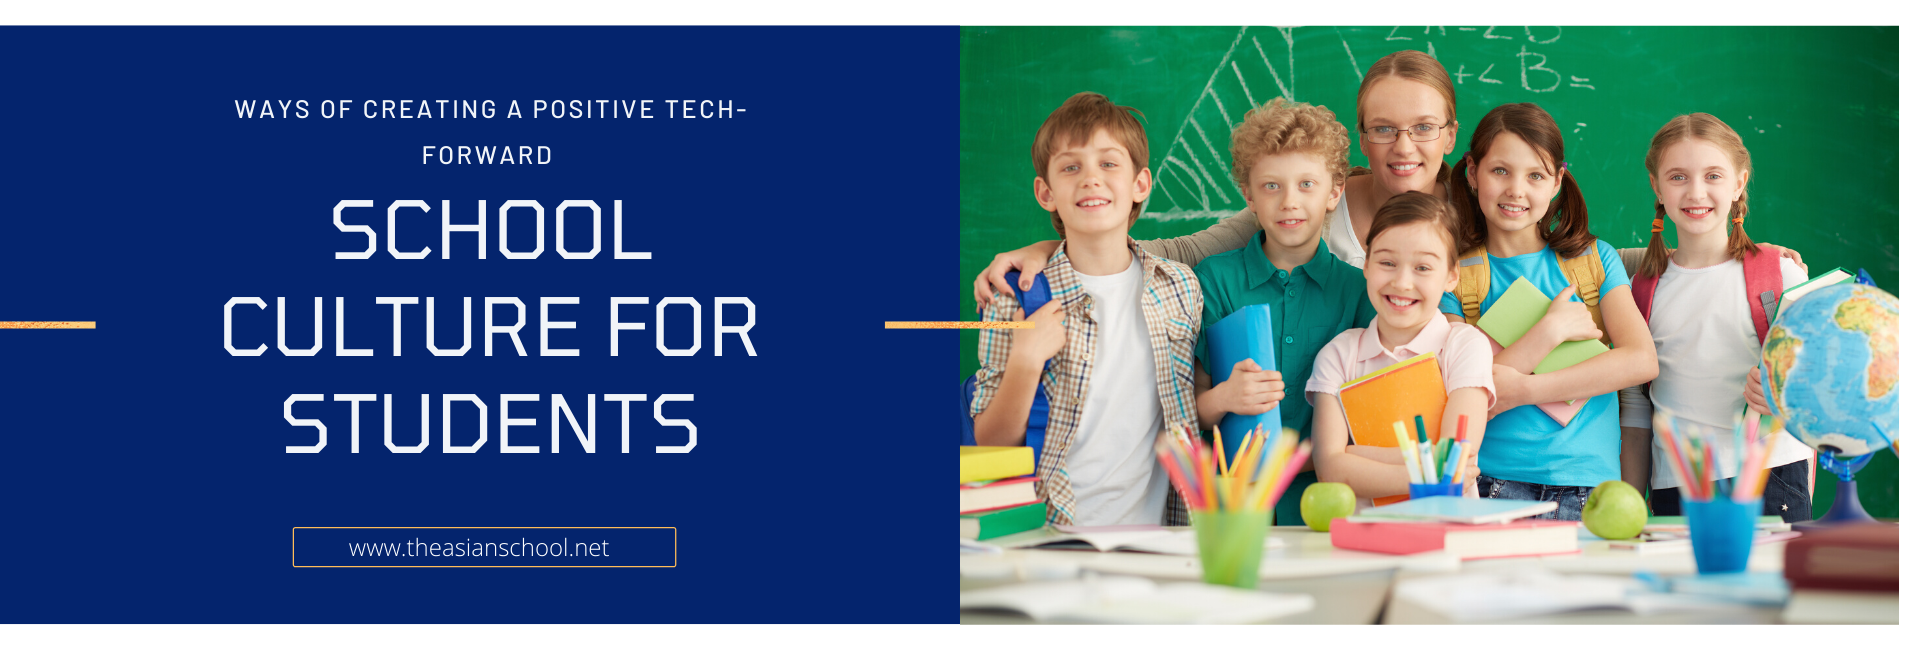 Ways Of Creating A Positive Tech-Forward School Culture For Students